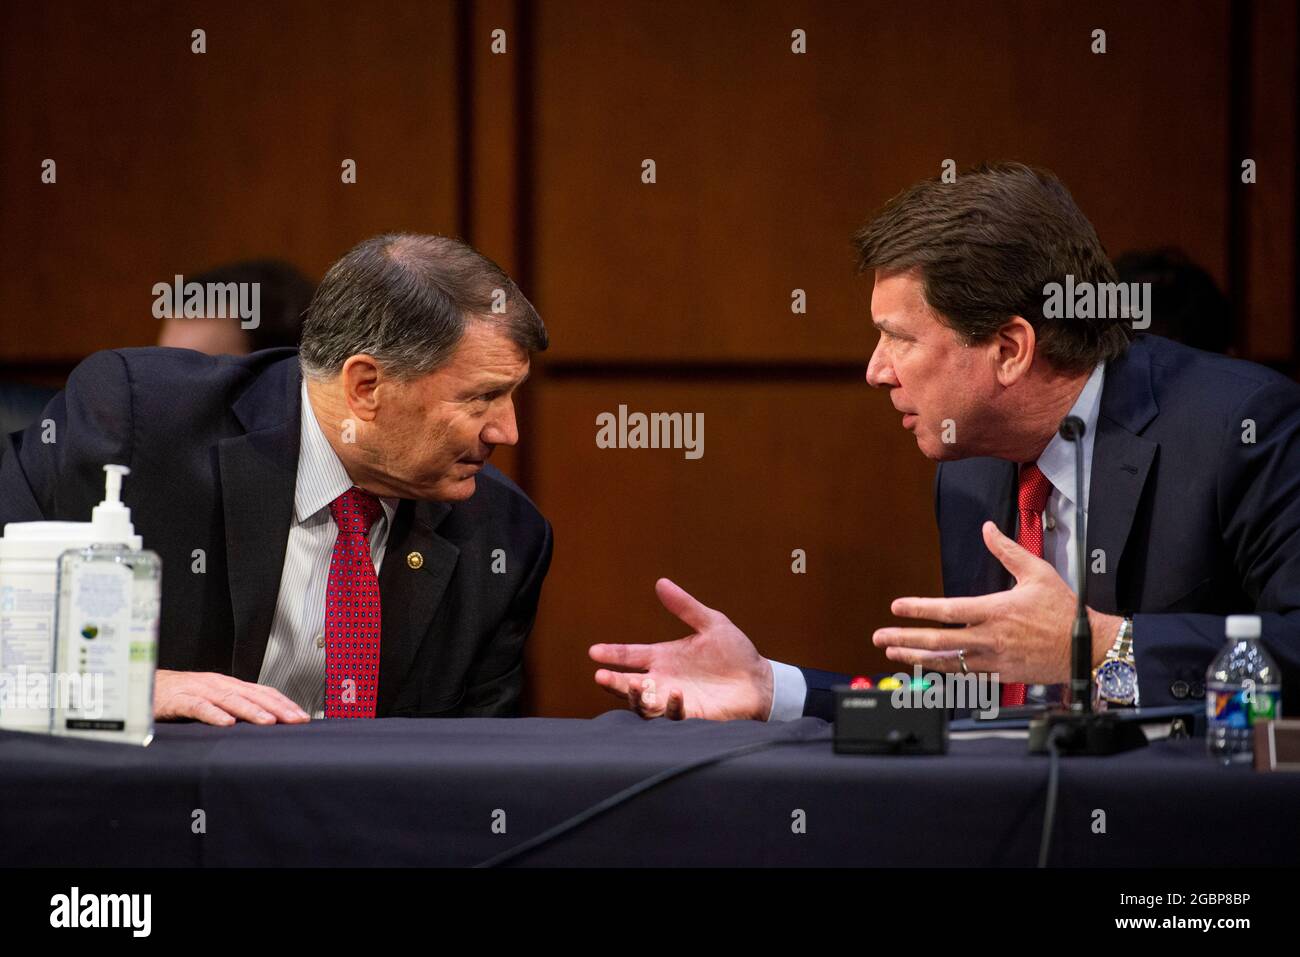 Washington, United States Of America. 04th Aug, 2021. United States Senator Mike Rounds (Republican of South Dakota), left, confers with United States Senator Bill Hagerty (Republican of Tennessee), right, during a Senate Committee on Foreign Relations business meeting for nominations and legislative considerations in the Hart Senate Office Building in Washington, DC, Wednesday, August 4, 2021. Credit: Rod Lamkey/CNP/Sipa USA Credit: Sipa USA/Alamy Live News Stock Photo